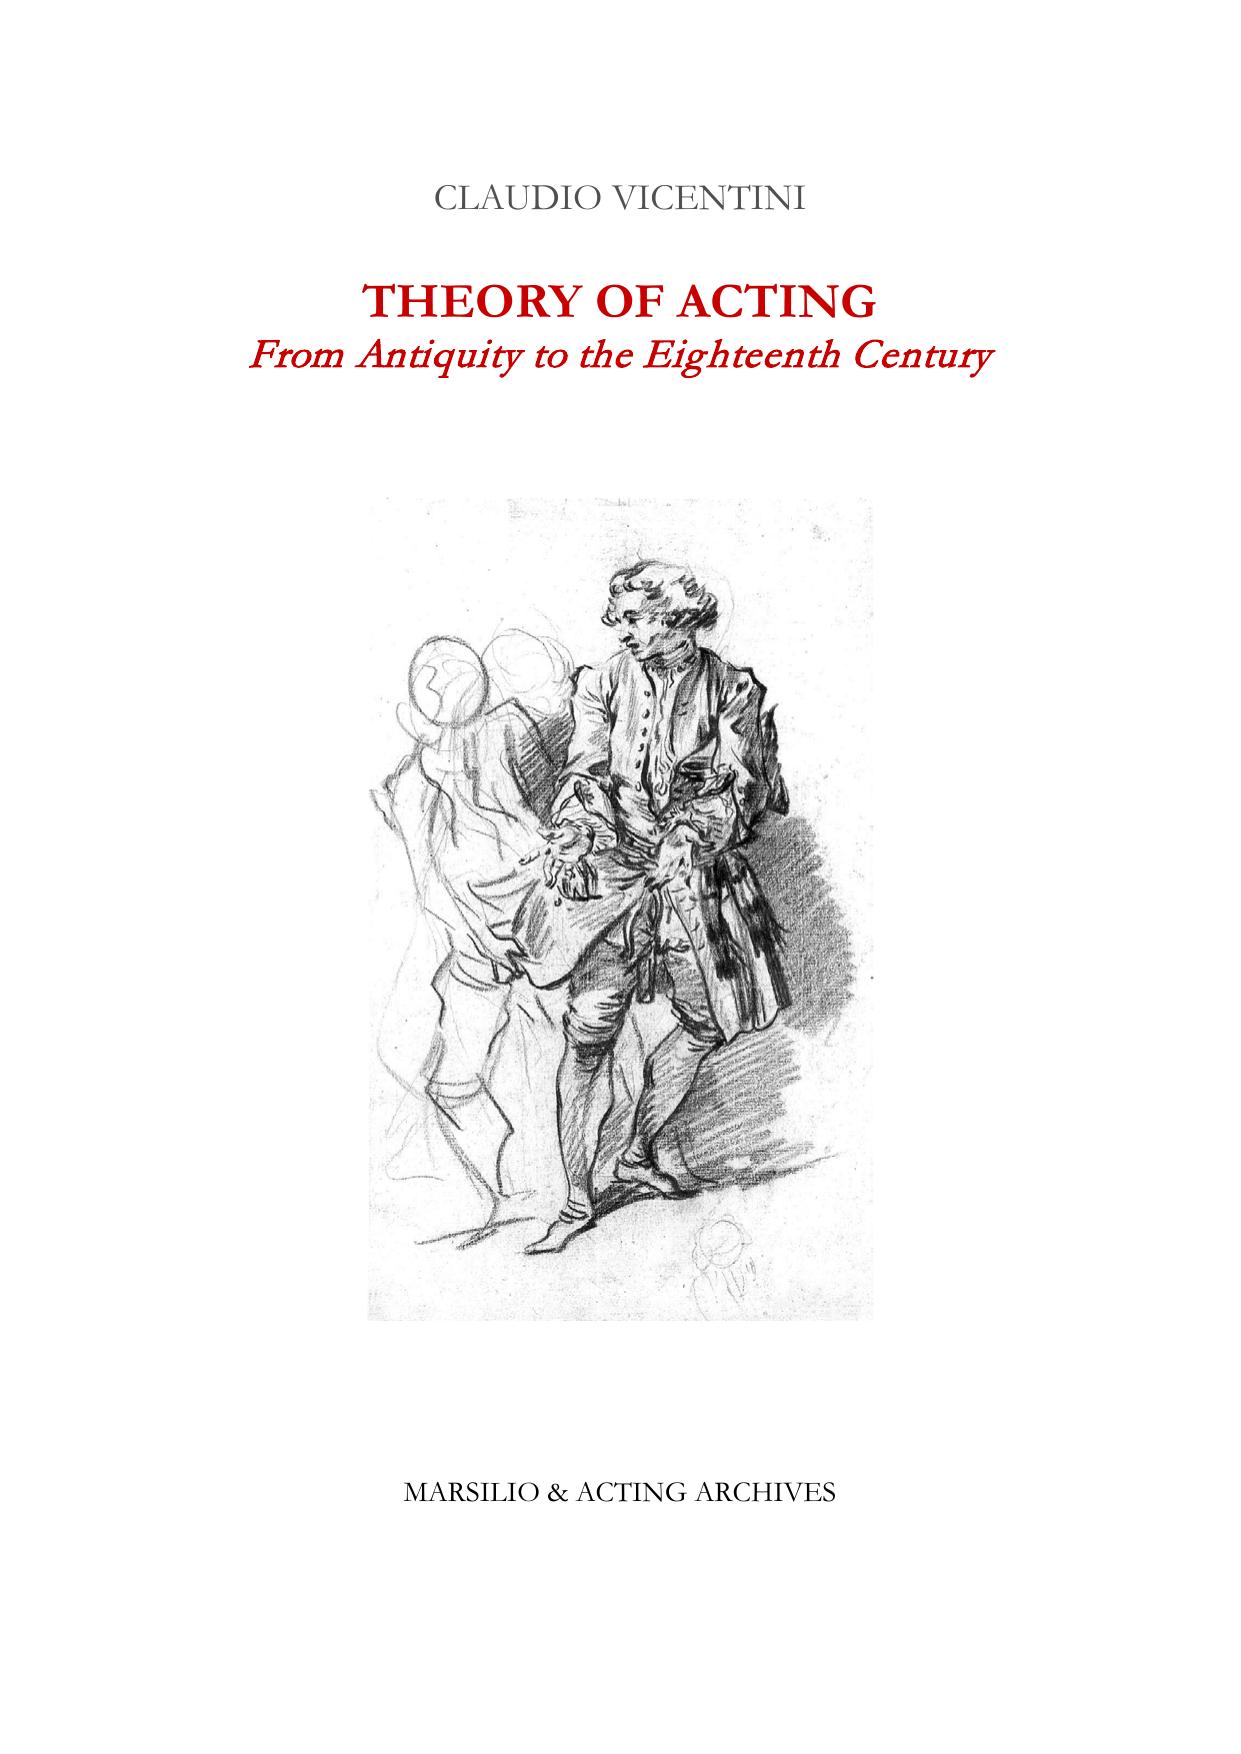 THEORY OF ACTING